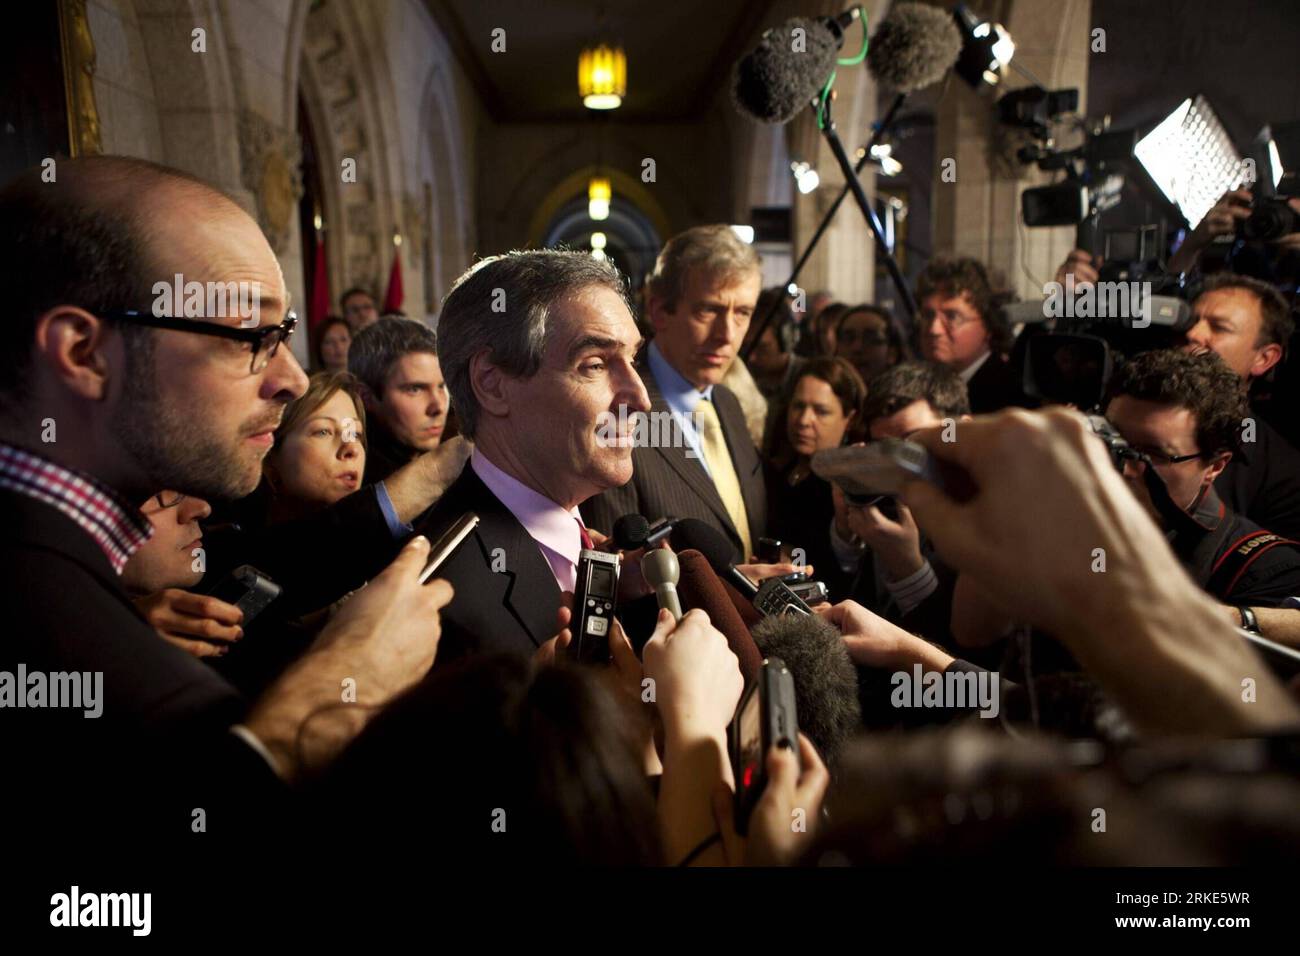 Bildnummer: 55055987  Datum: 23.03.2011  Copyright: imago/Xinhua (110323) -- OTTAWA, March 23, 2011 (Xinhua) -- Canada s Liberals leader Michael Ignatieff speaks to journalists following the tabling of the federal budget on Parliament Hill in Ottawa, Canada, March 22, 2011. Canadian Minister of Finance Jim Flaherty Tuesday tabled in the House of Commons the 2011 budget which is featured with a priority of job growth, but the opposition parties have rejected the budget, a move probably leads to a federal election in the spring. (Xinhua/Christopher Pike) (lyi) CANADA-OTTAWA-BUDGET PUBLICATIONxNO Stock Photo